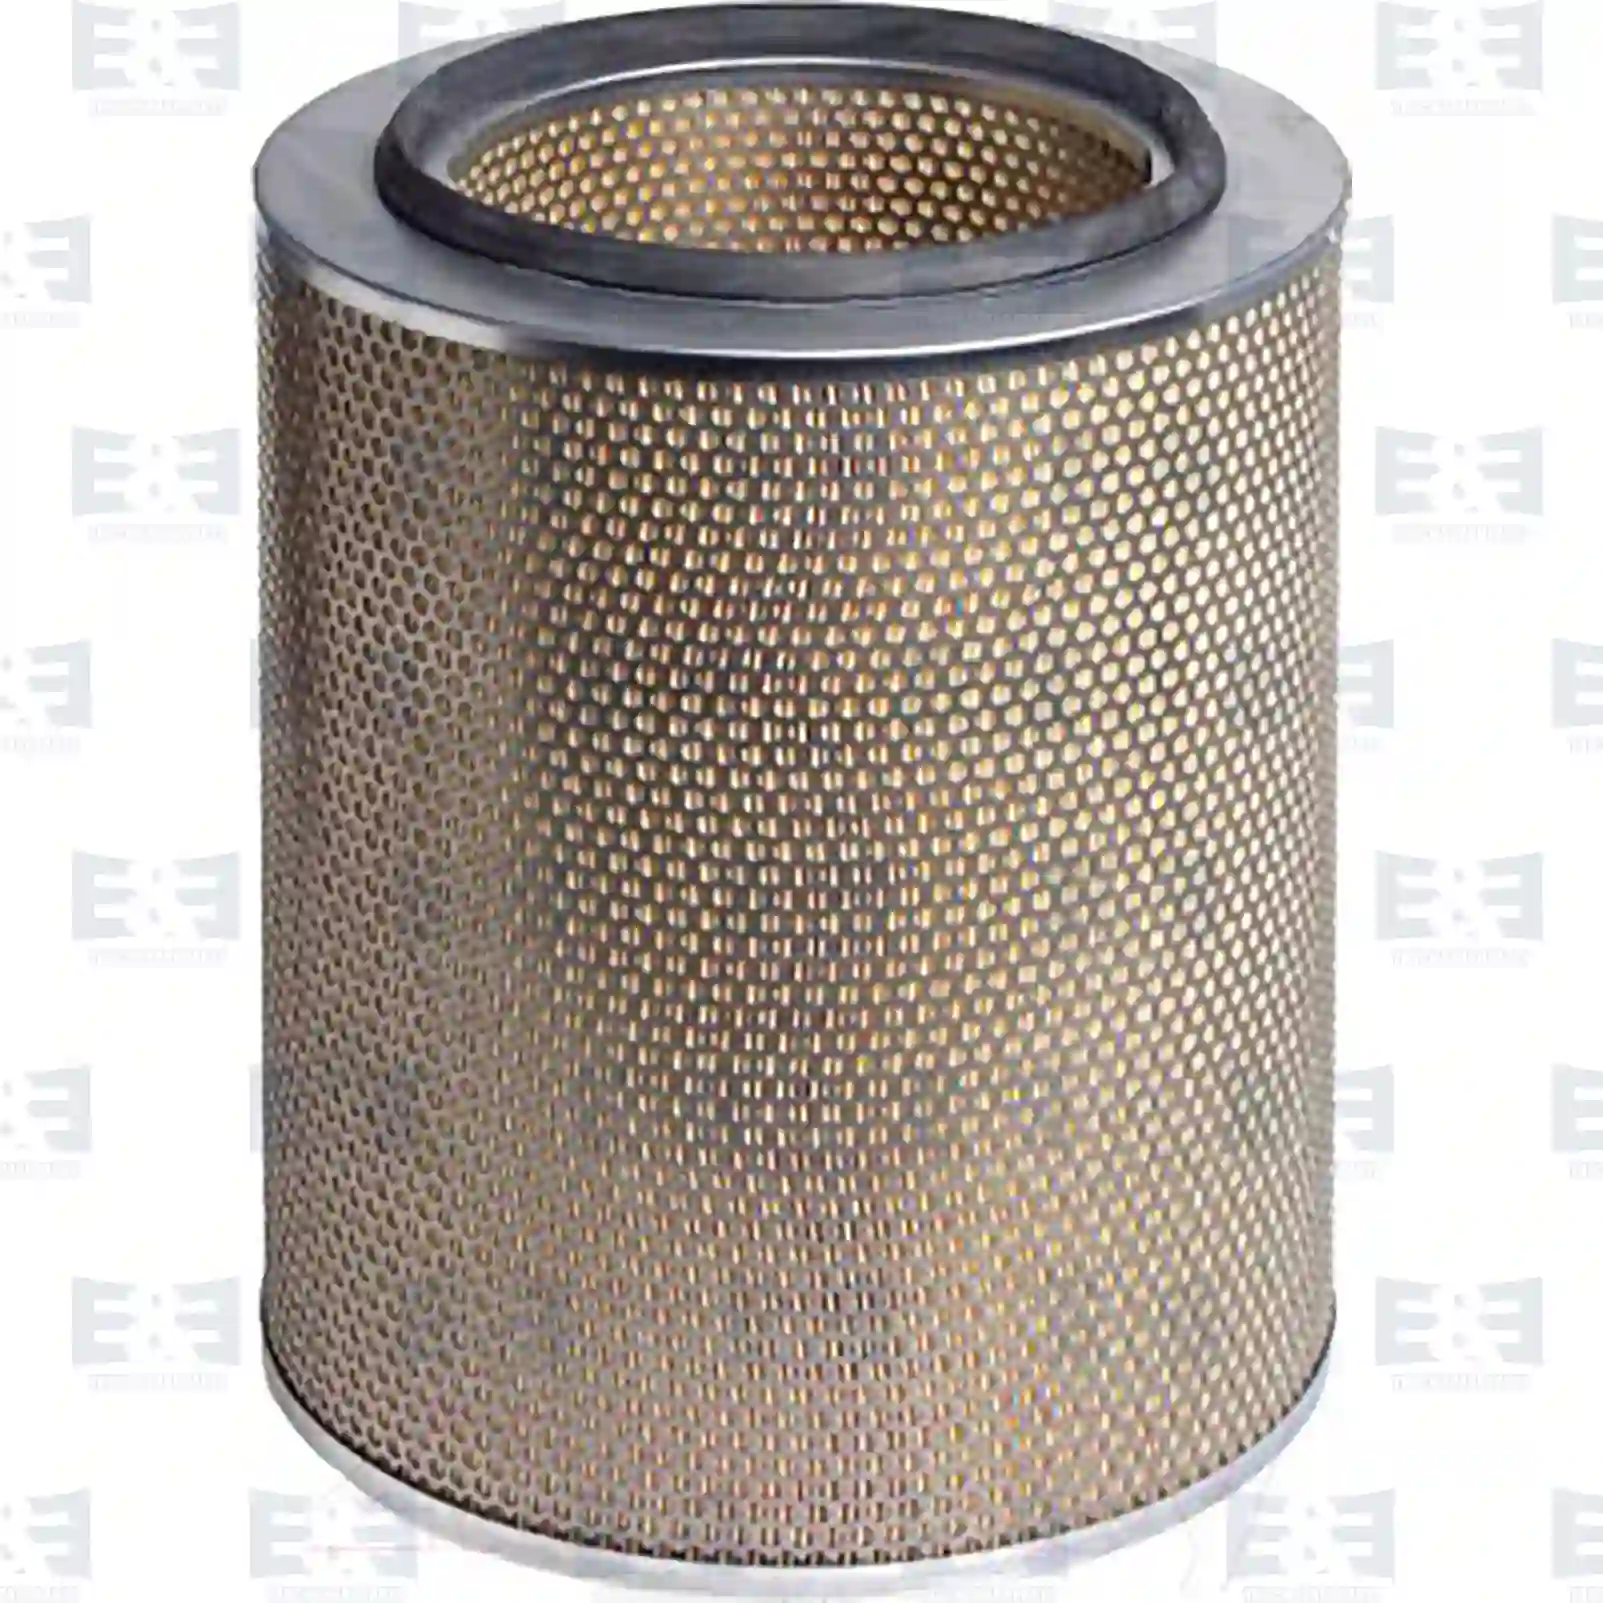  Air Filter Air filter, EE No 2E2204803 ,  oem no:0667078, 1207748, 269172, 667078, 08122408, 0667078, 00667078, 04788592, 08122408, 47885924, Y05772505, 00667078, 04788592, 08122408, 4788592, 8122408, 08122408, 04788592, 08122408, 81083040086, 020340600, 6005019705, 371307, 395773, 3070300000, SA6392, CH12387, ZG00811-0008 E&E Truck Spare Parts | Truck Spare Parts, Auotomotive Spare Parts